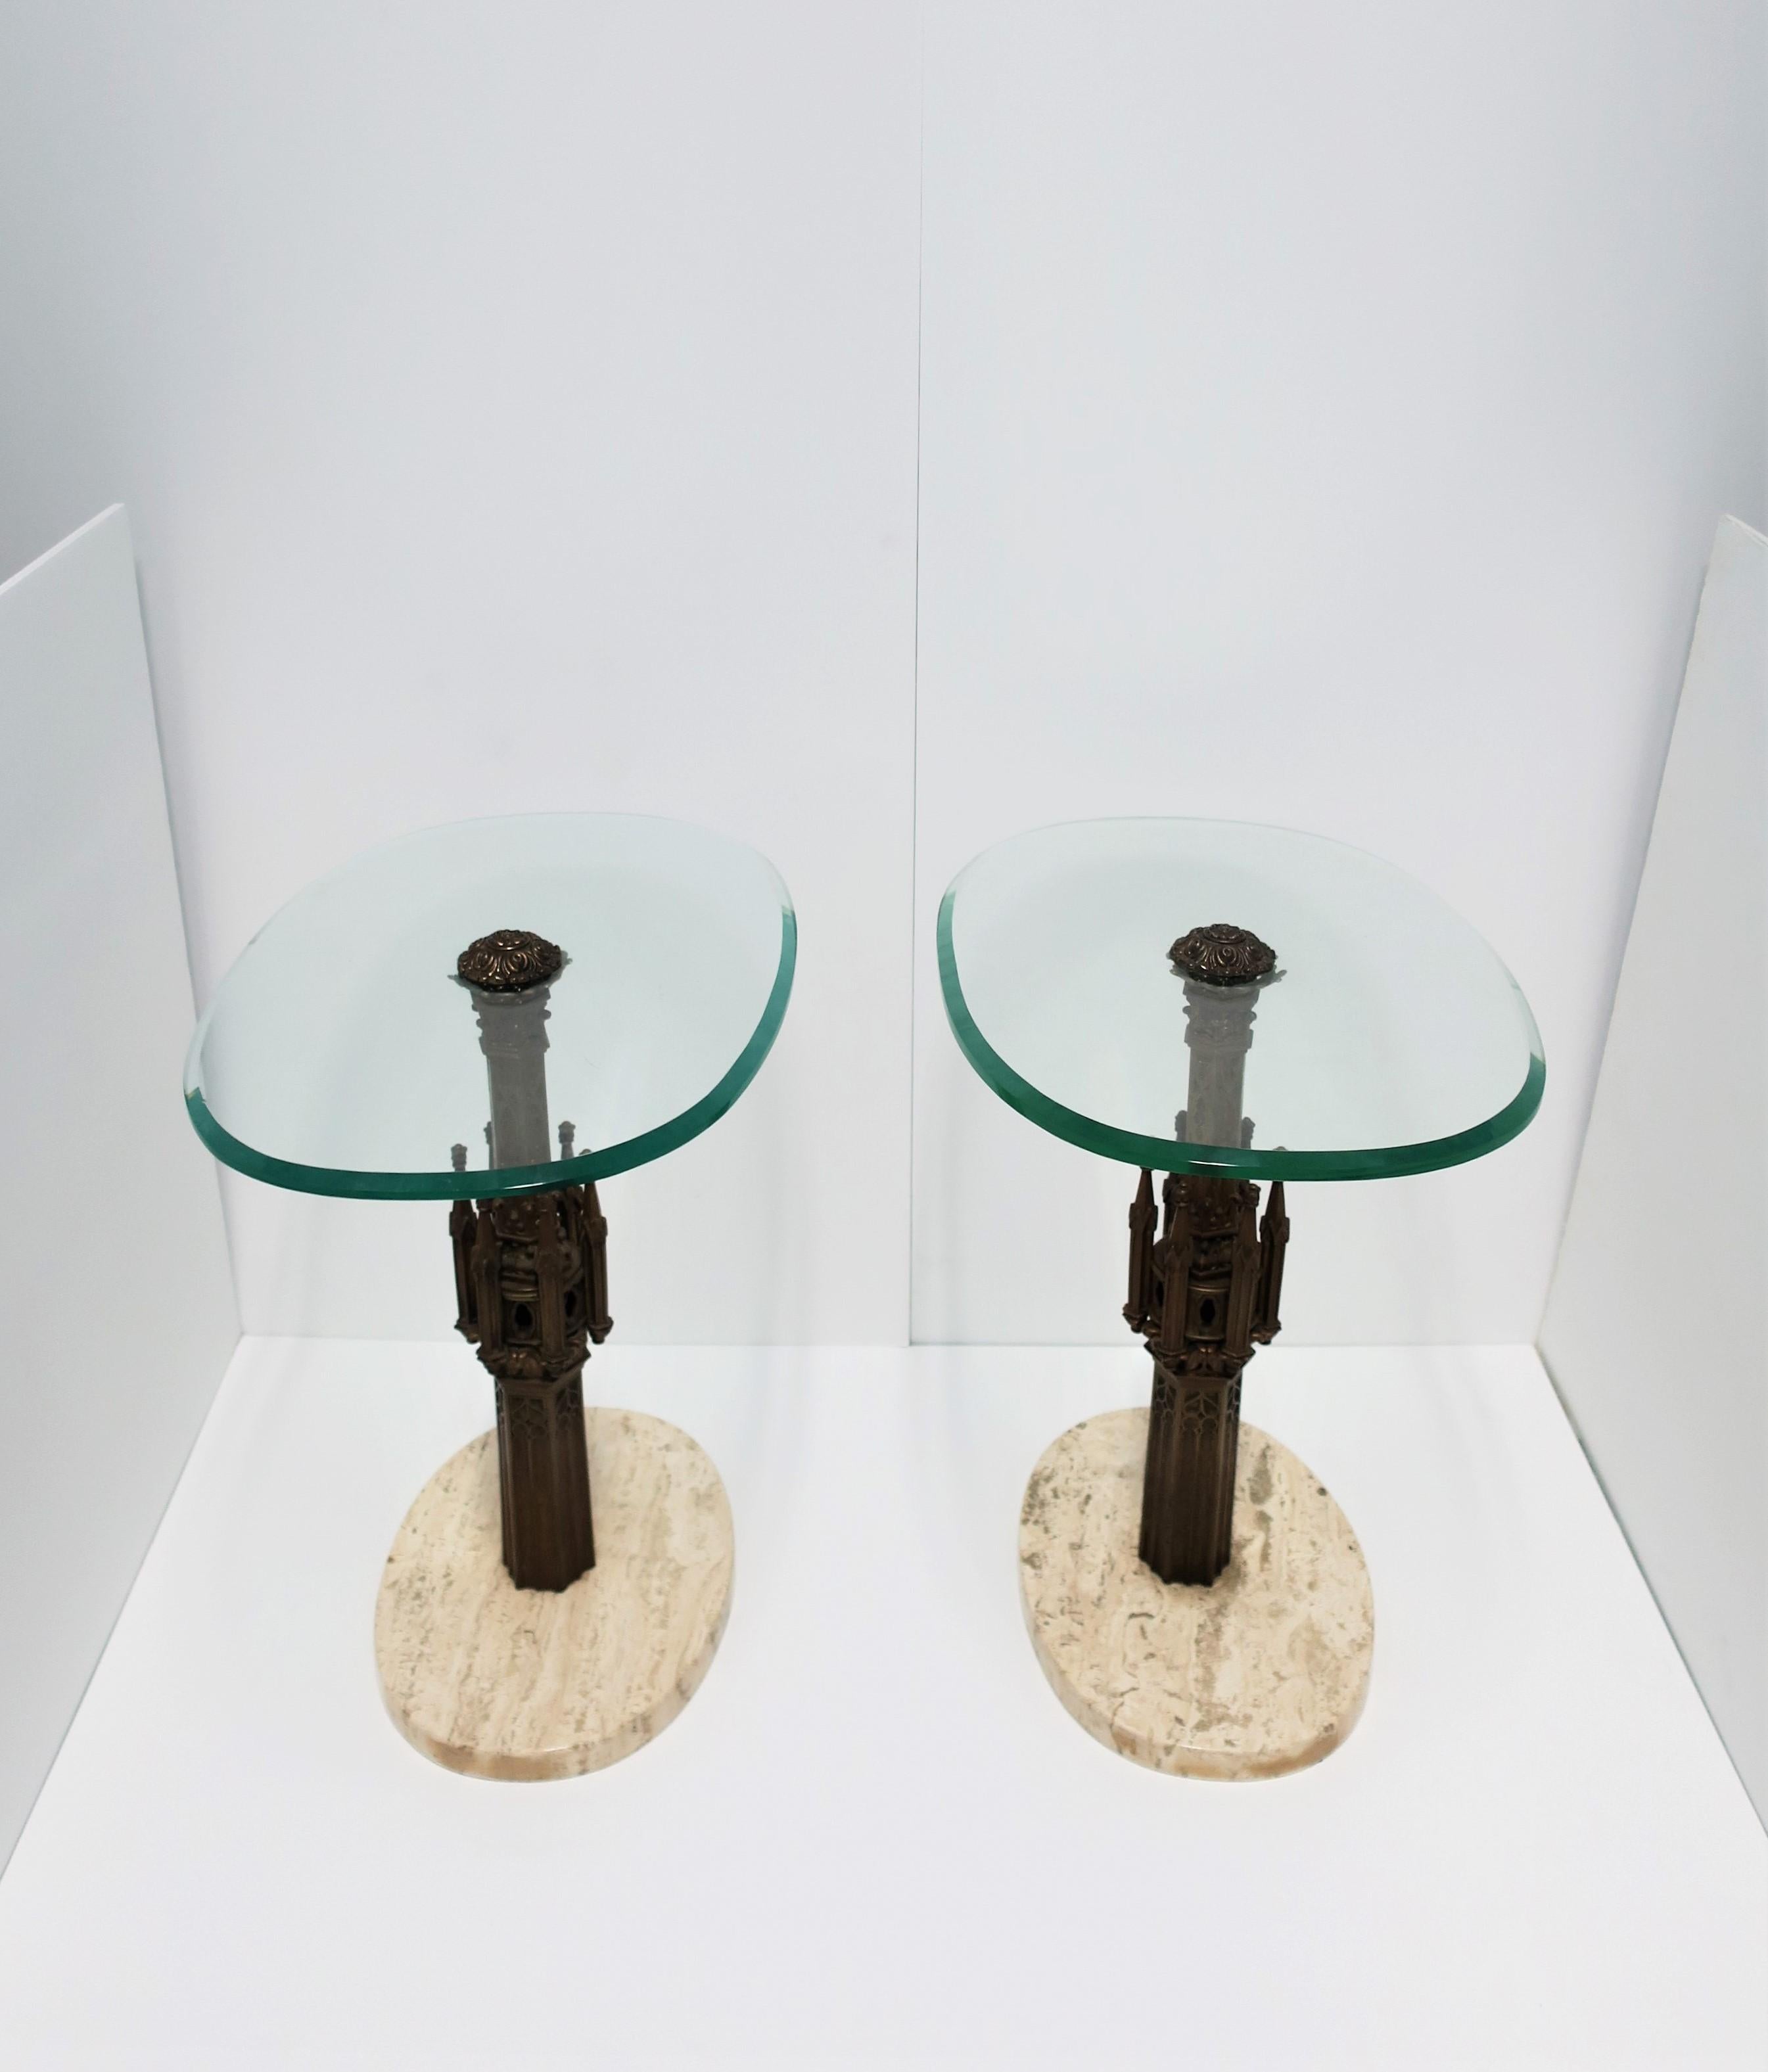 A very special and stunning pair of Italian brass or bronze, glass, and travertine marble end or side tables with detailed Italian Gothic architecture bronze/brass frame, circa mid-20th century, 1960s, Italy. Tables have substantial oval glass tops